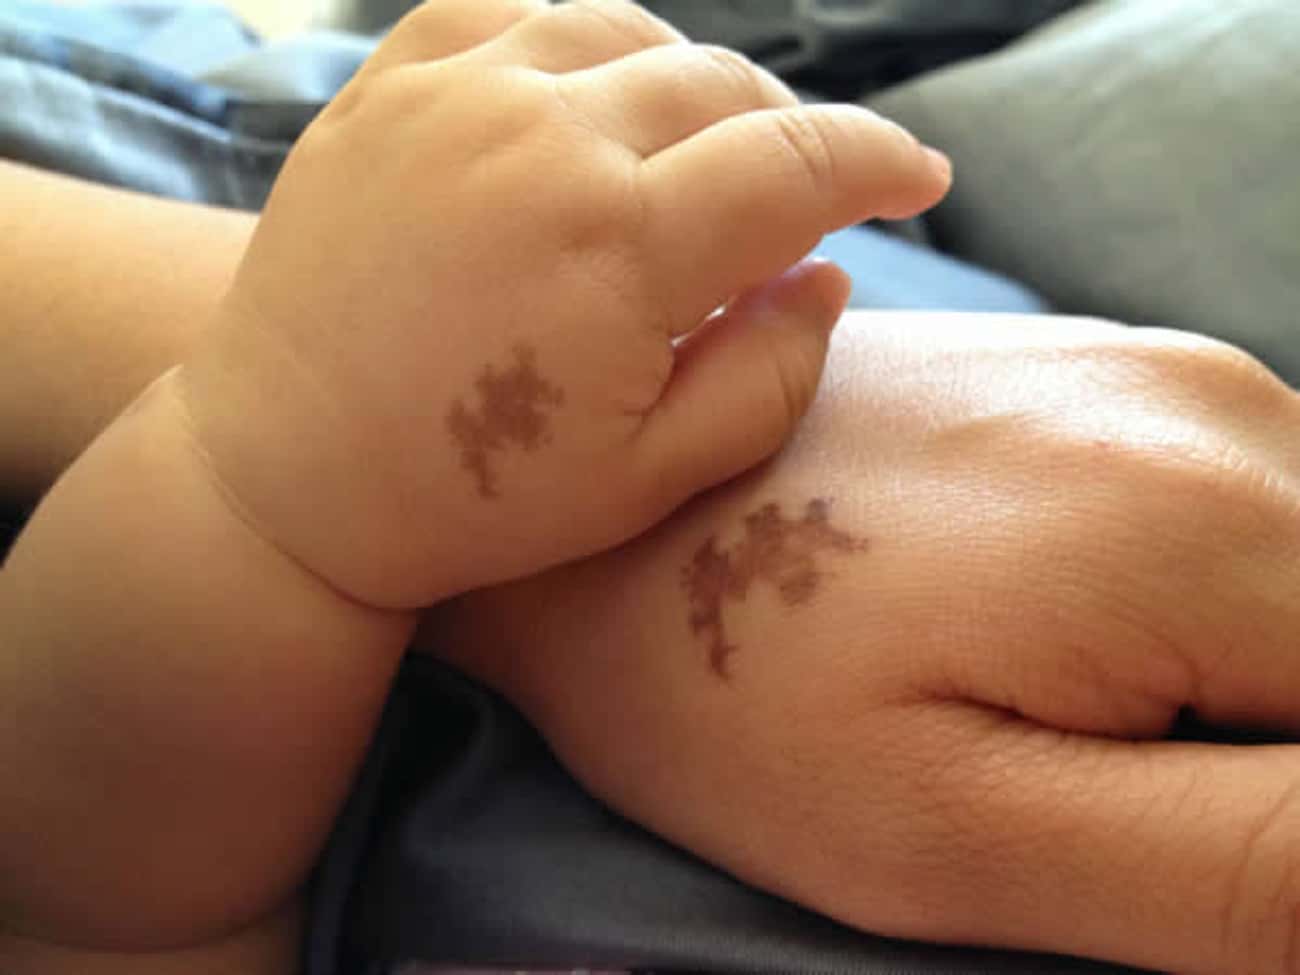 This Mom Got A Tattoo To Share Her Baby's Birthmark